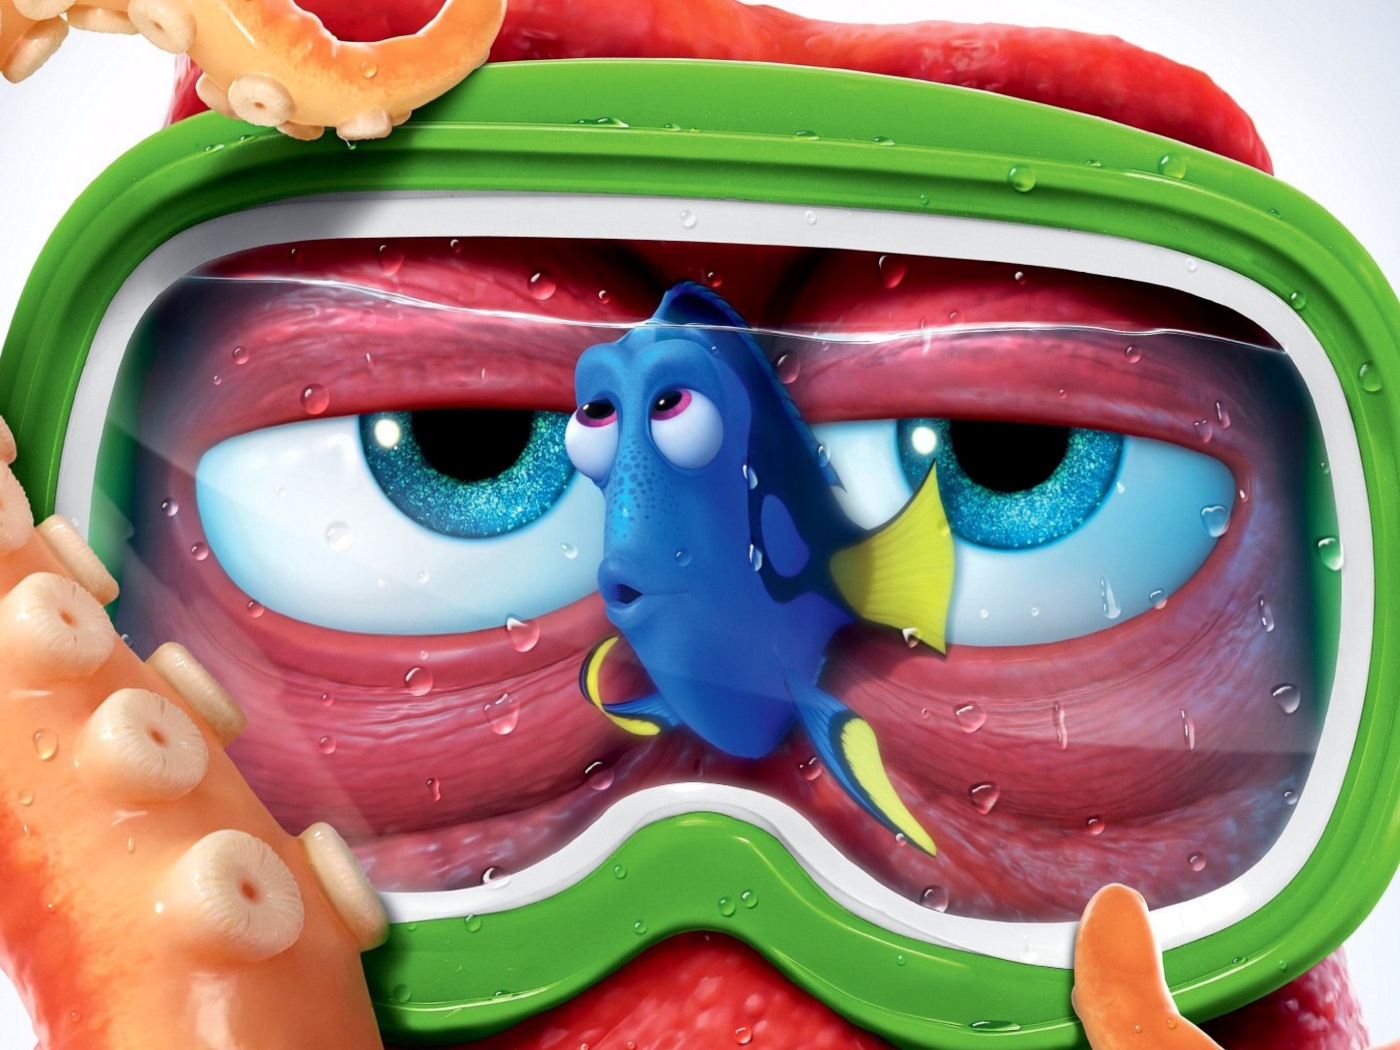 Finding Dory 3D Film and Nemo Fish wallpaper 1400x1050